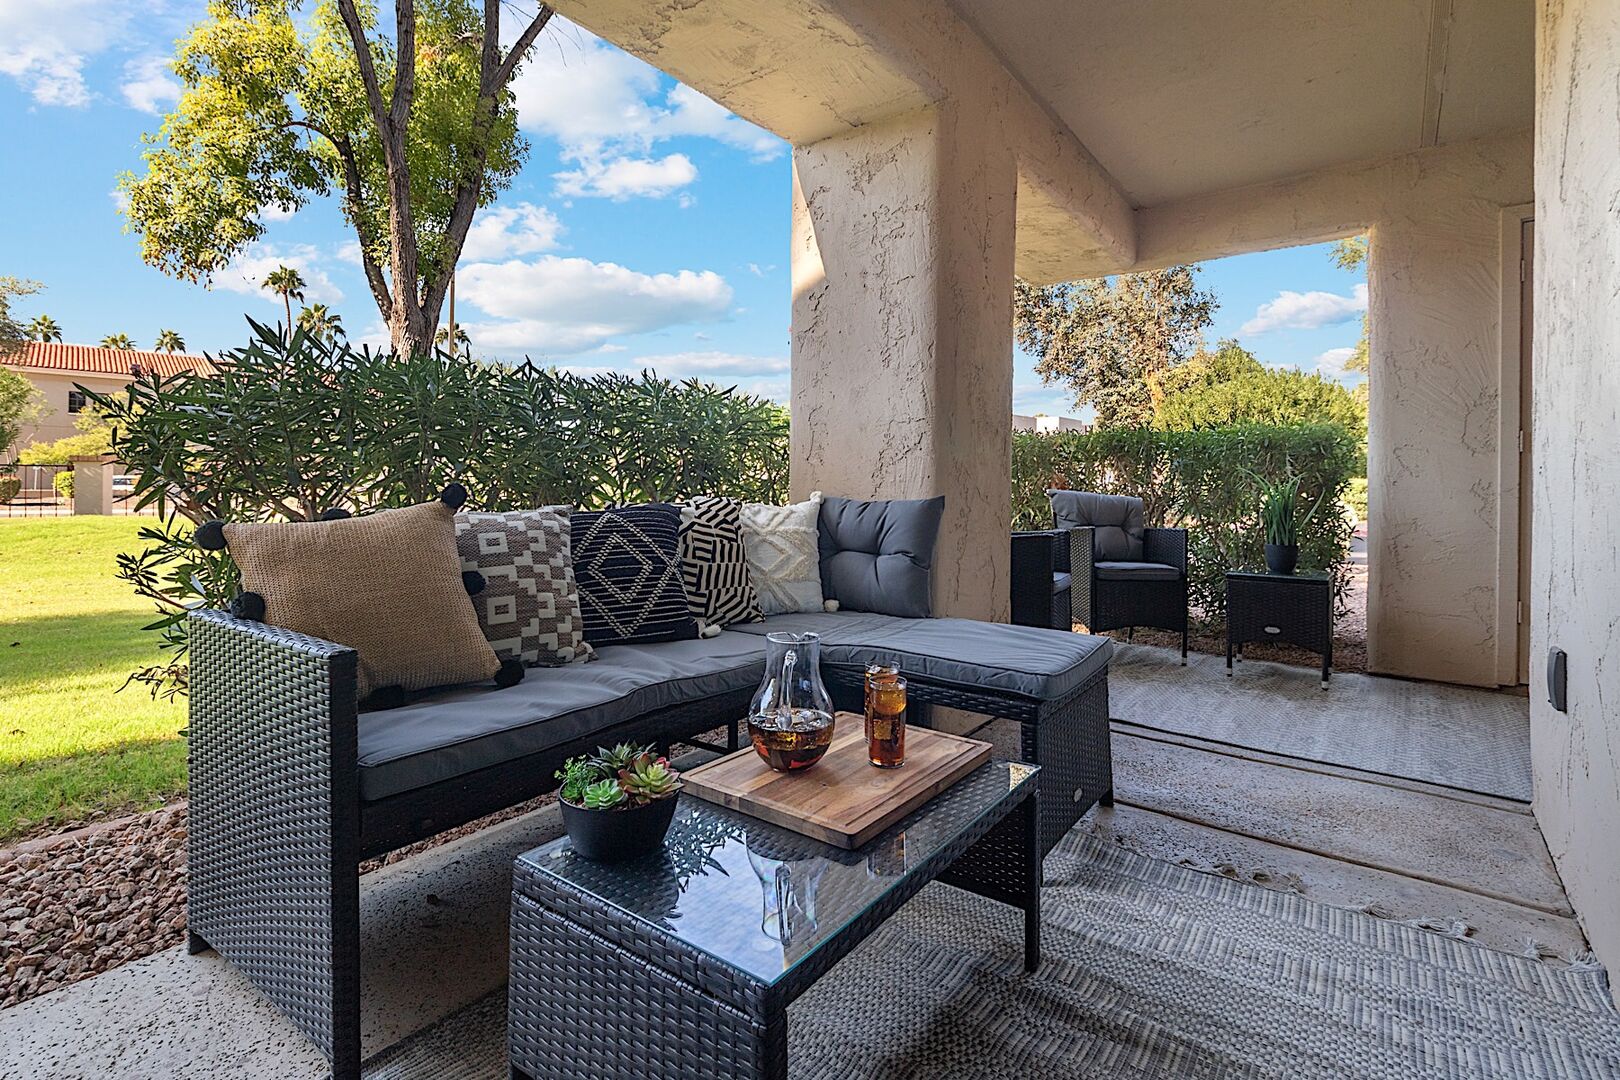 Private patio w/ L-shaped outdoor sofa, coffee table and two sitting chairs.